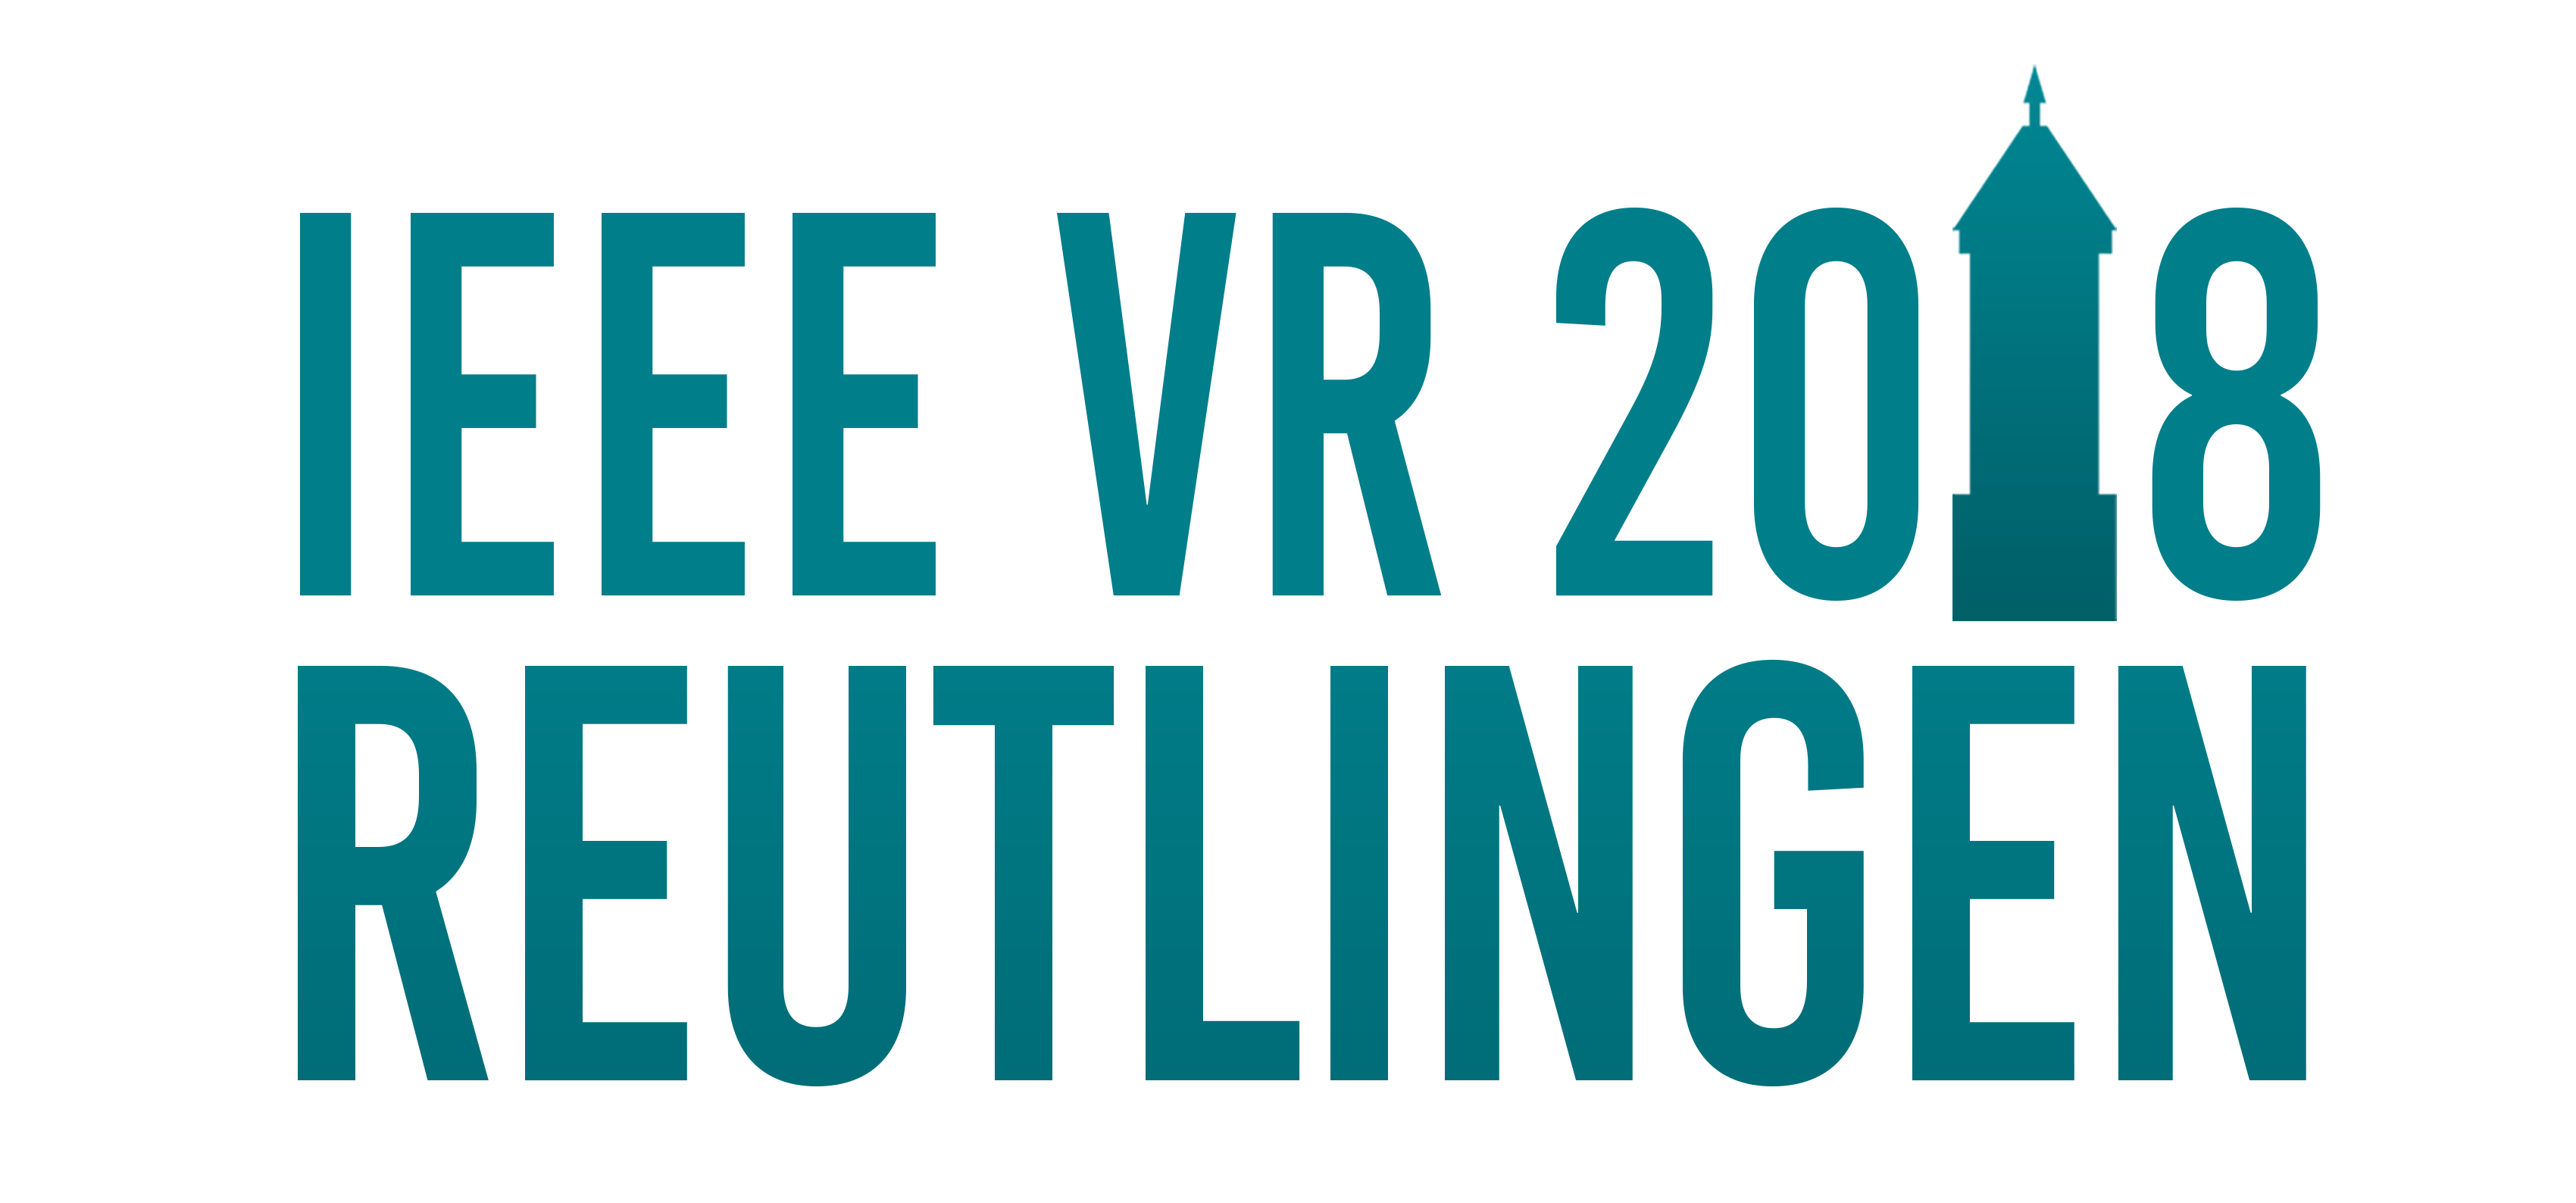 March 18, 2018 – IEEE Virtual Reality